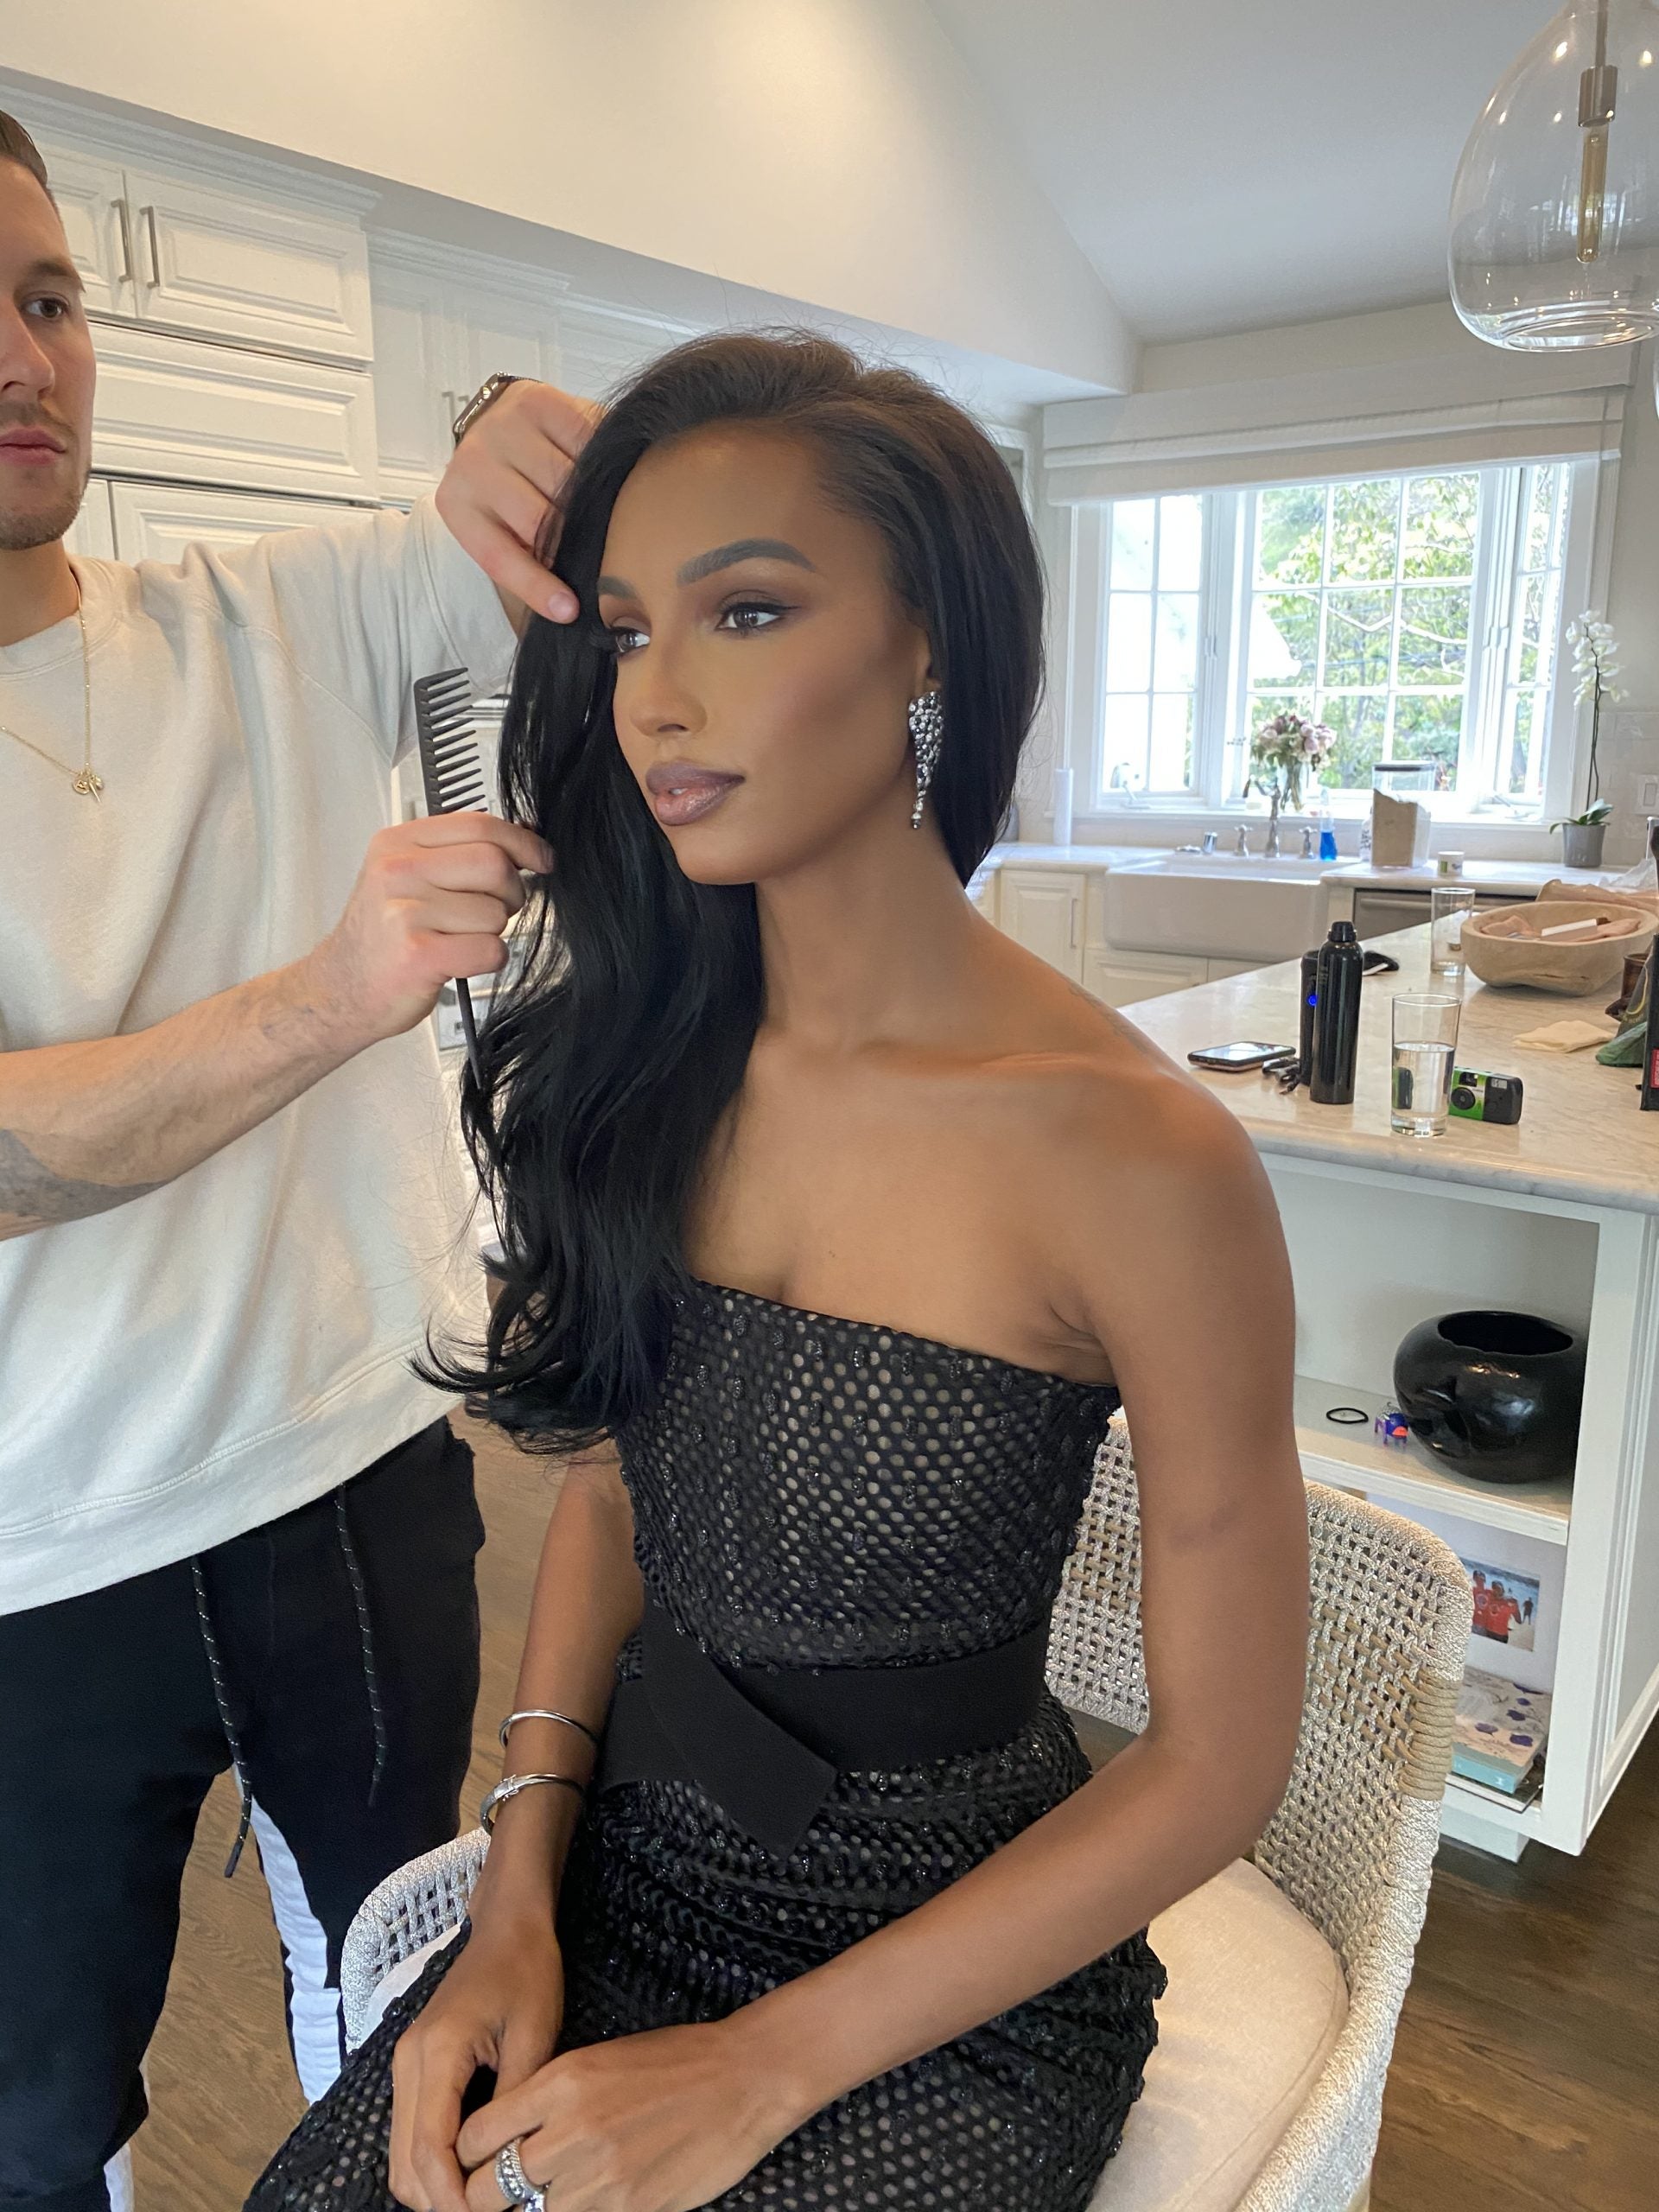 Here's How Supermodel Jasmine Tookes Got Ready For The 51st NAACP Image Awards